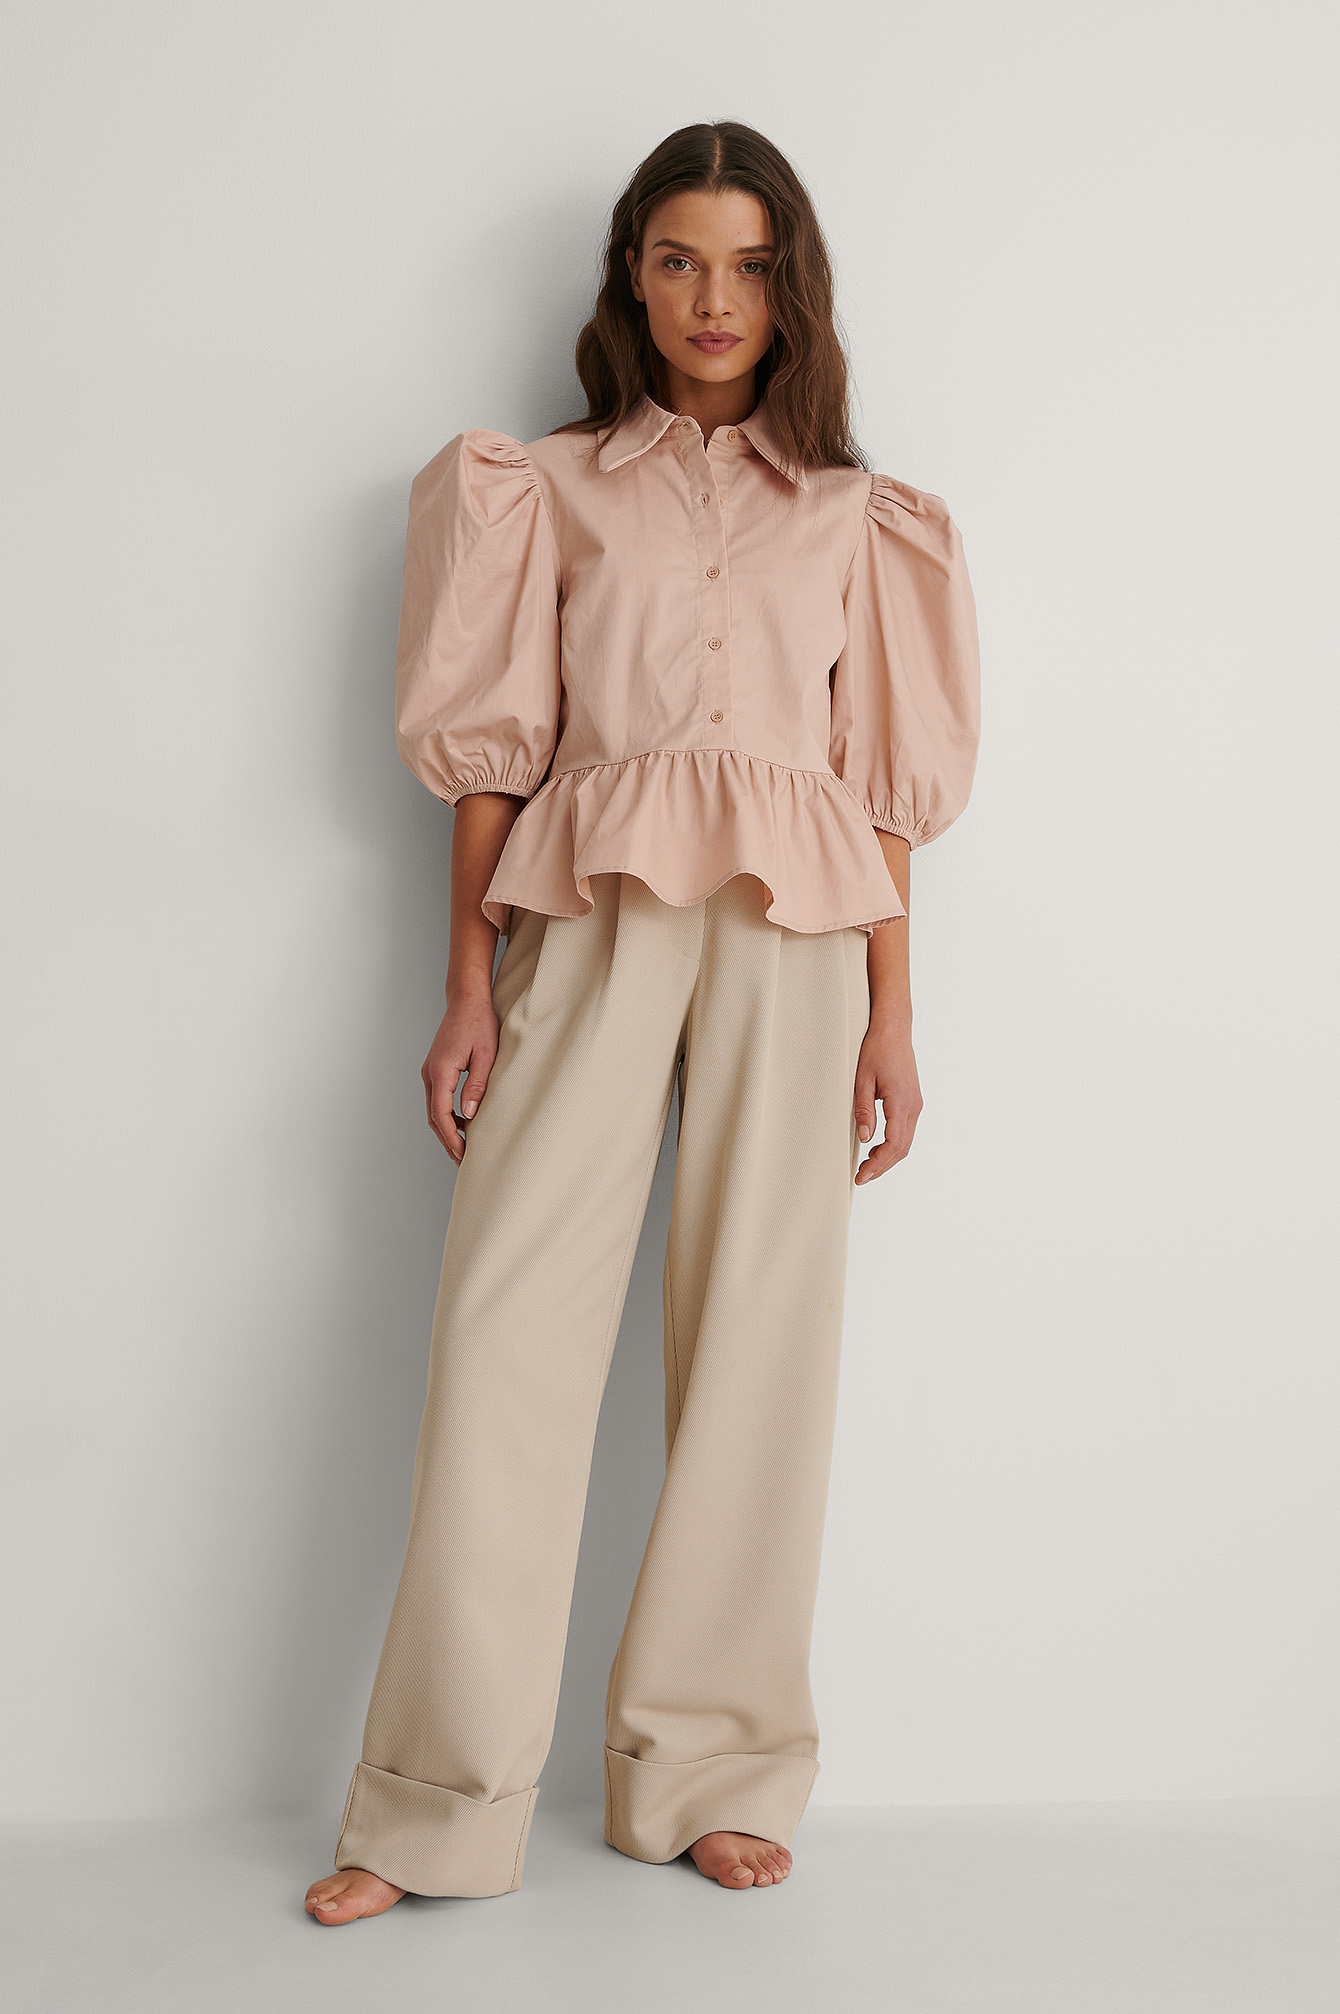 Pointy Collar Puff Sleeve Top Outfit.